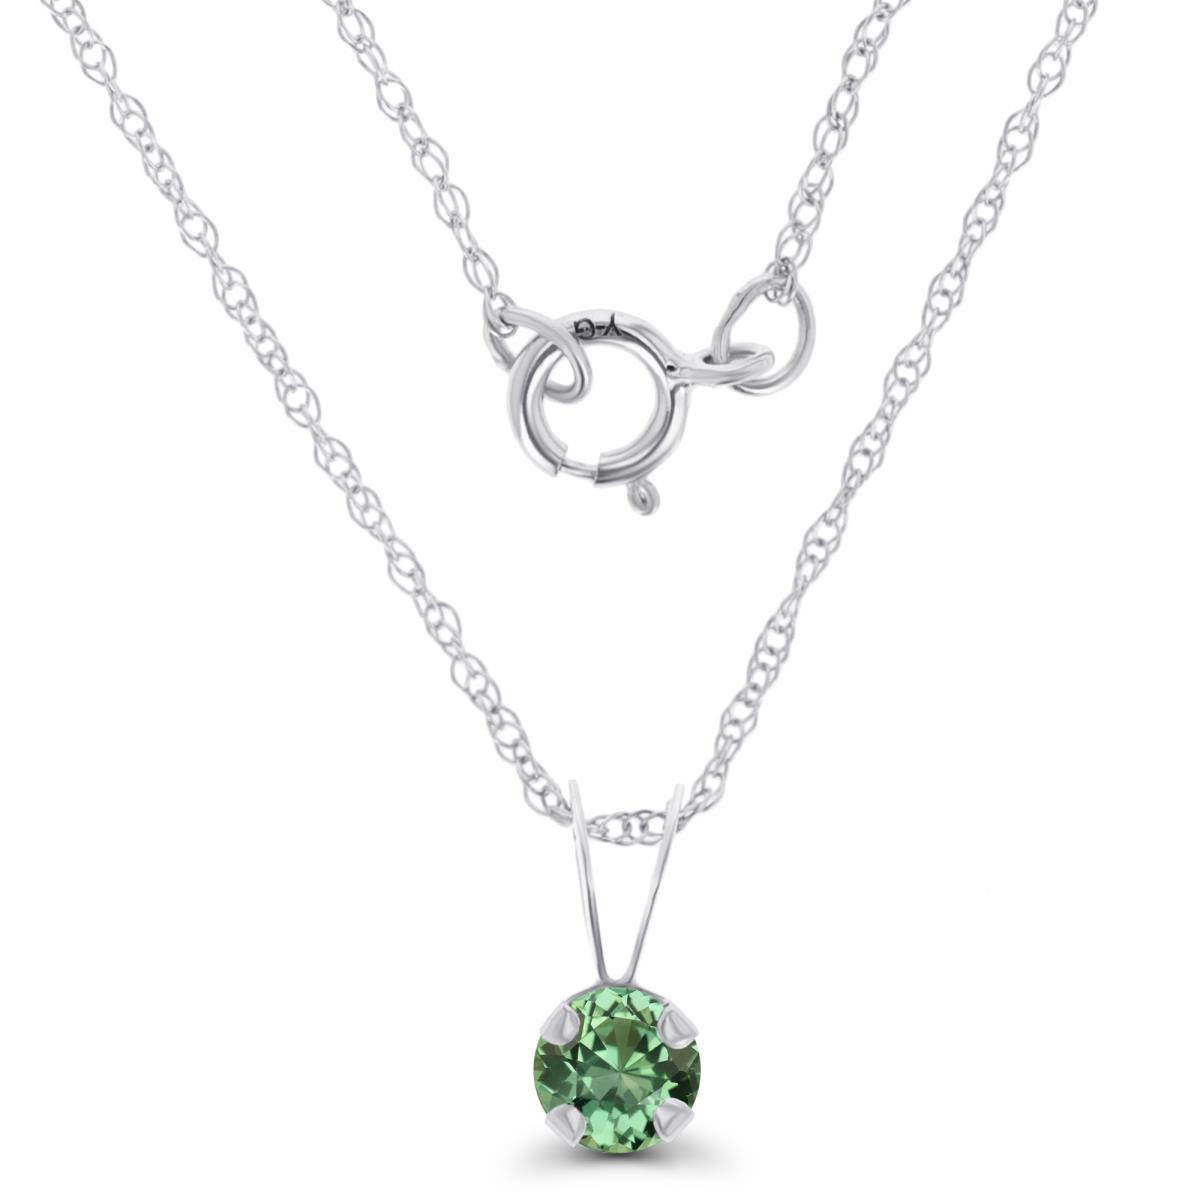 14K White Gold 4mm Round Cr Green Sapphire 18" Rope Chain Necklace